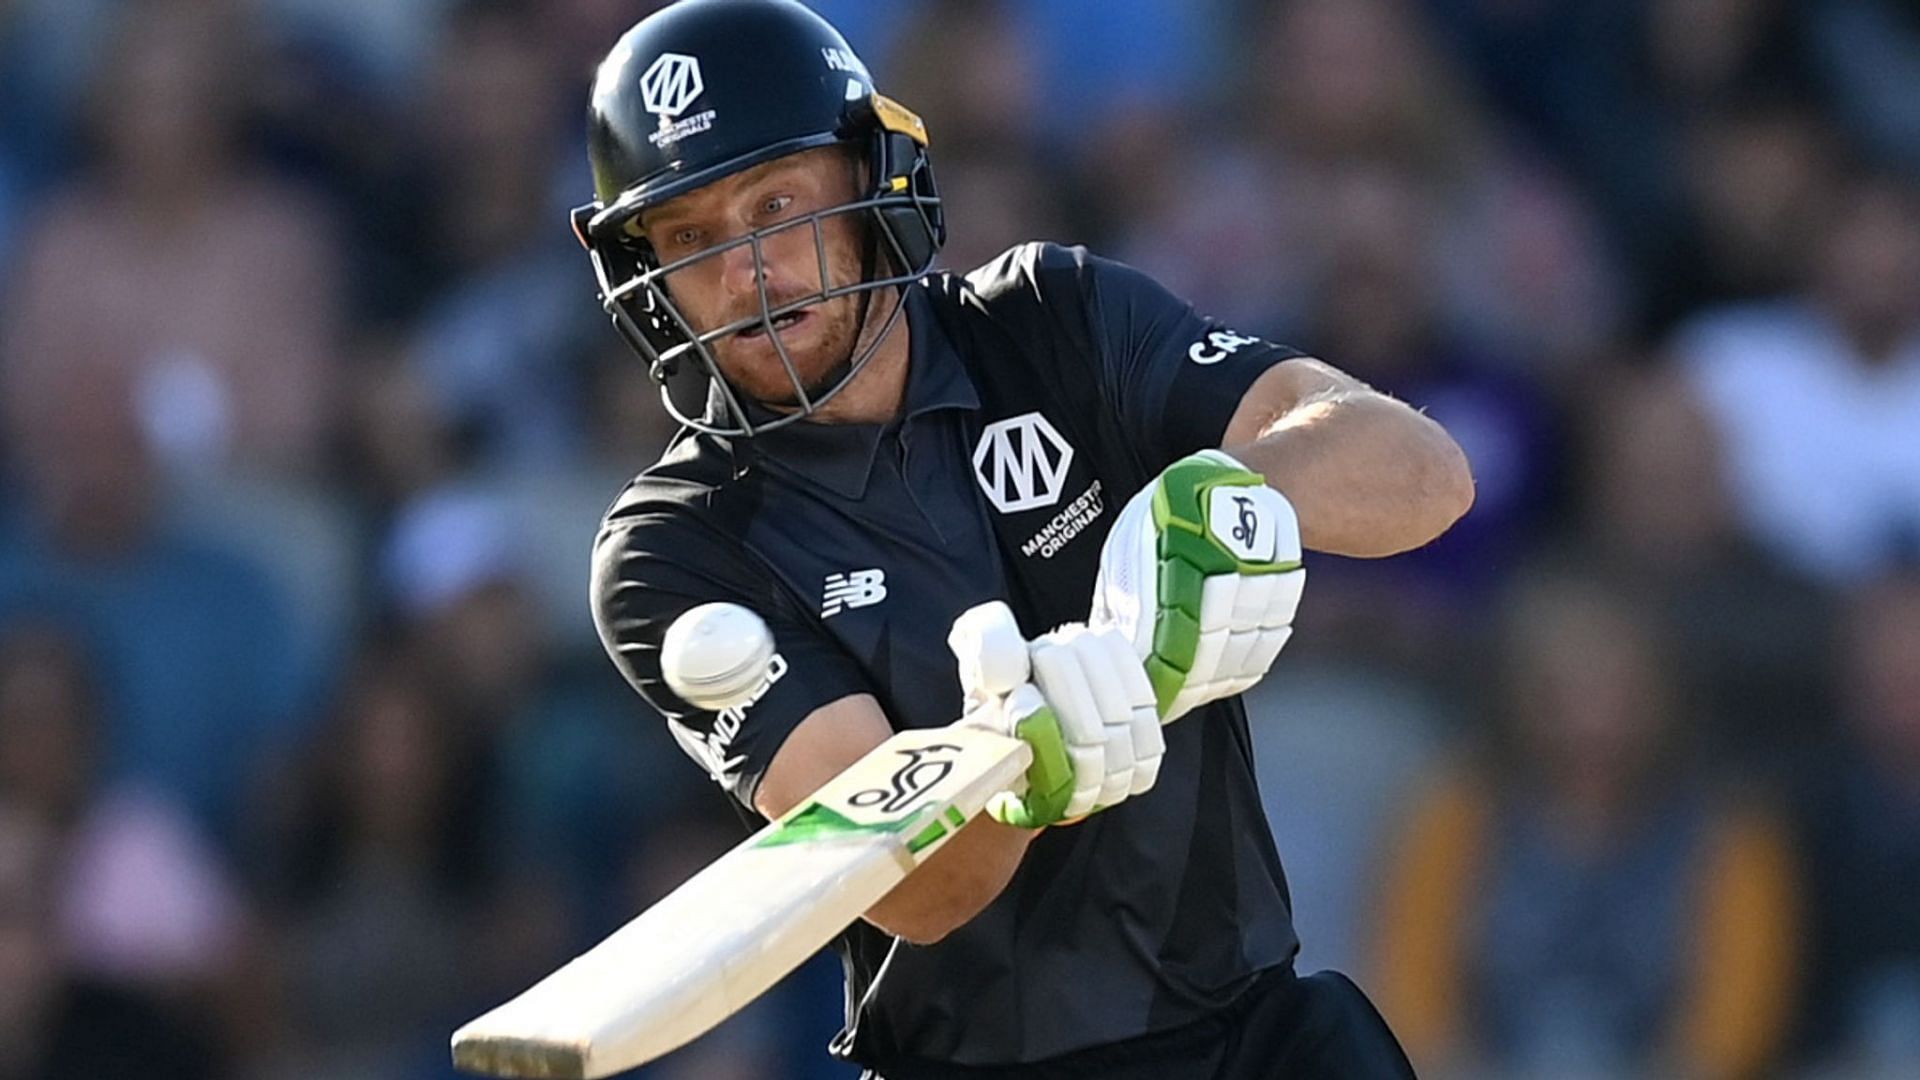 Will Jos Buttler power the Originals to their first win of the season?